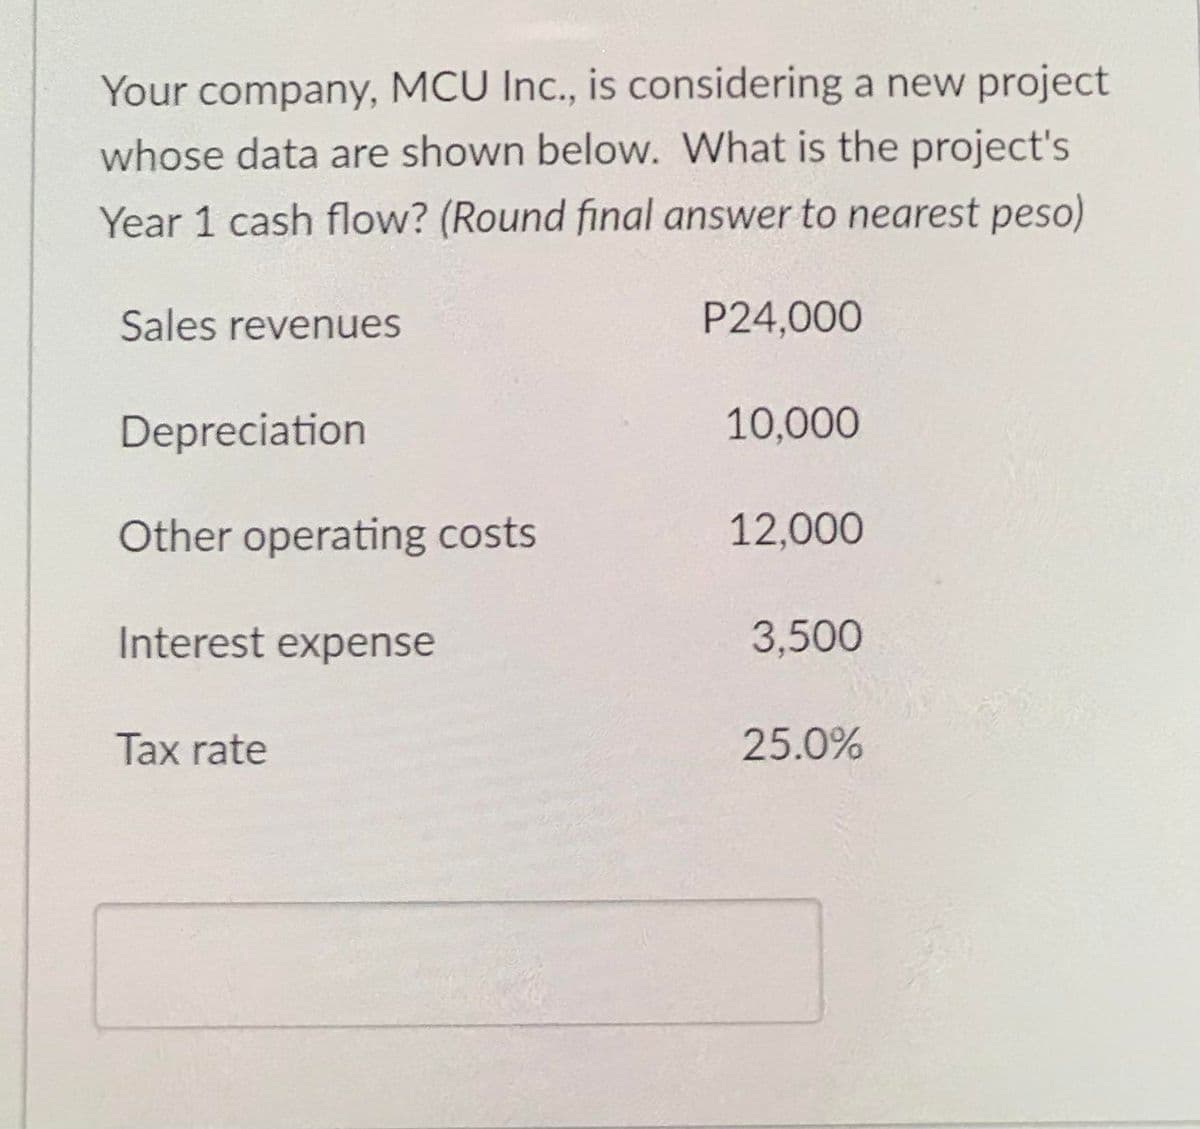 Your company, MCU Inc., is considering a new project
whose data are shown below. What is the project's
Year 1 cash flow? (Round final answer to nearest peso)
Sales revenues
P24,000
Depreciation
10,000
Other operating costs
12,000
Interest expense
3,500
Tax rate
25.0%
